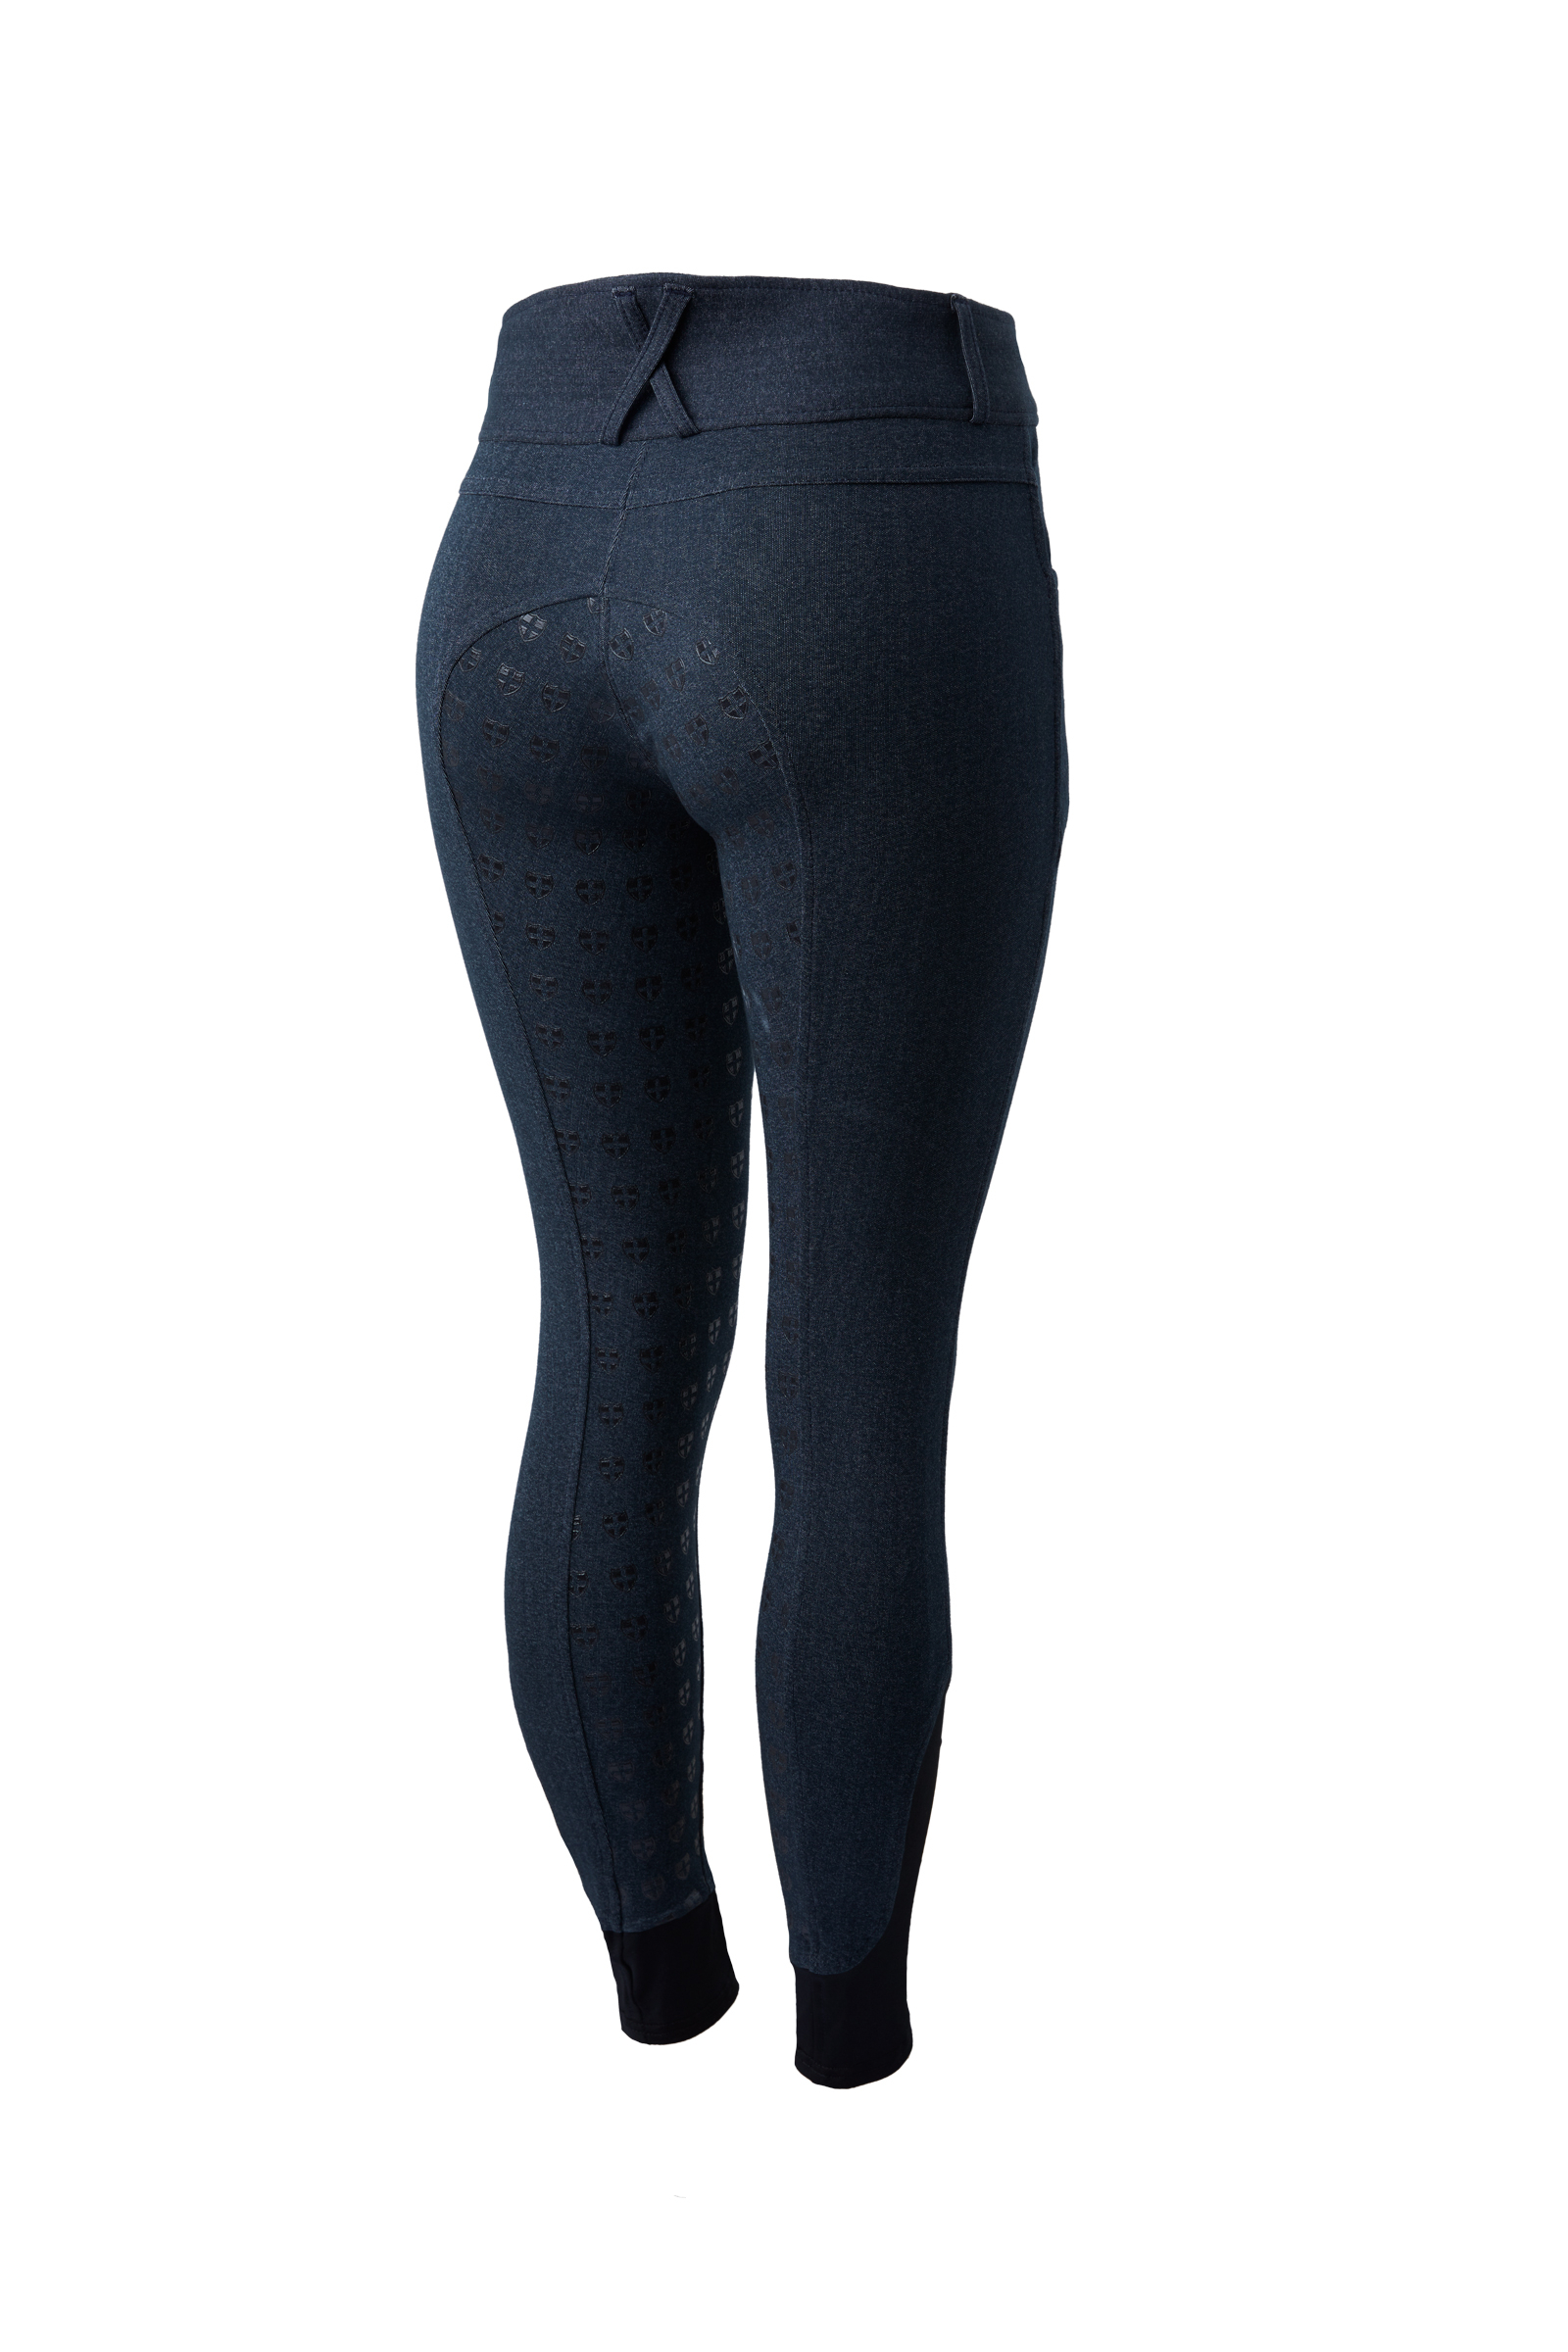 Buy Horze Anna Women's Silicone Full Seat Breeches with Phone Pocket